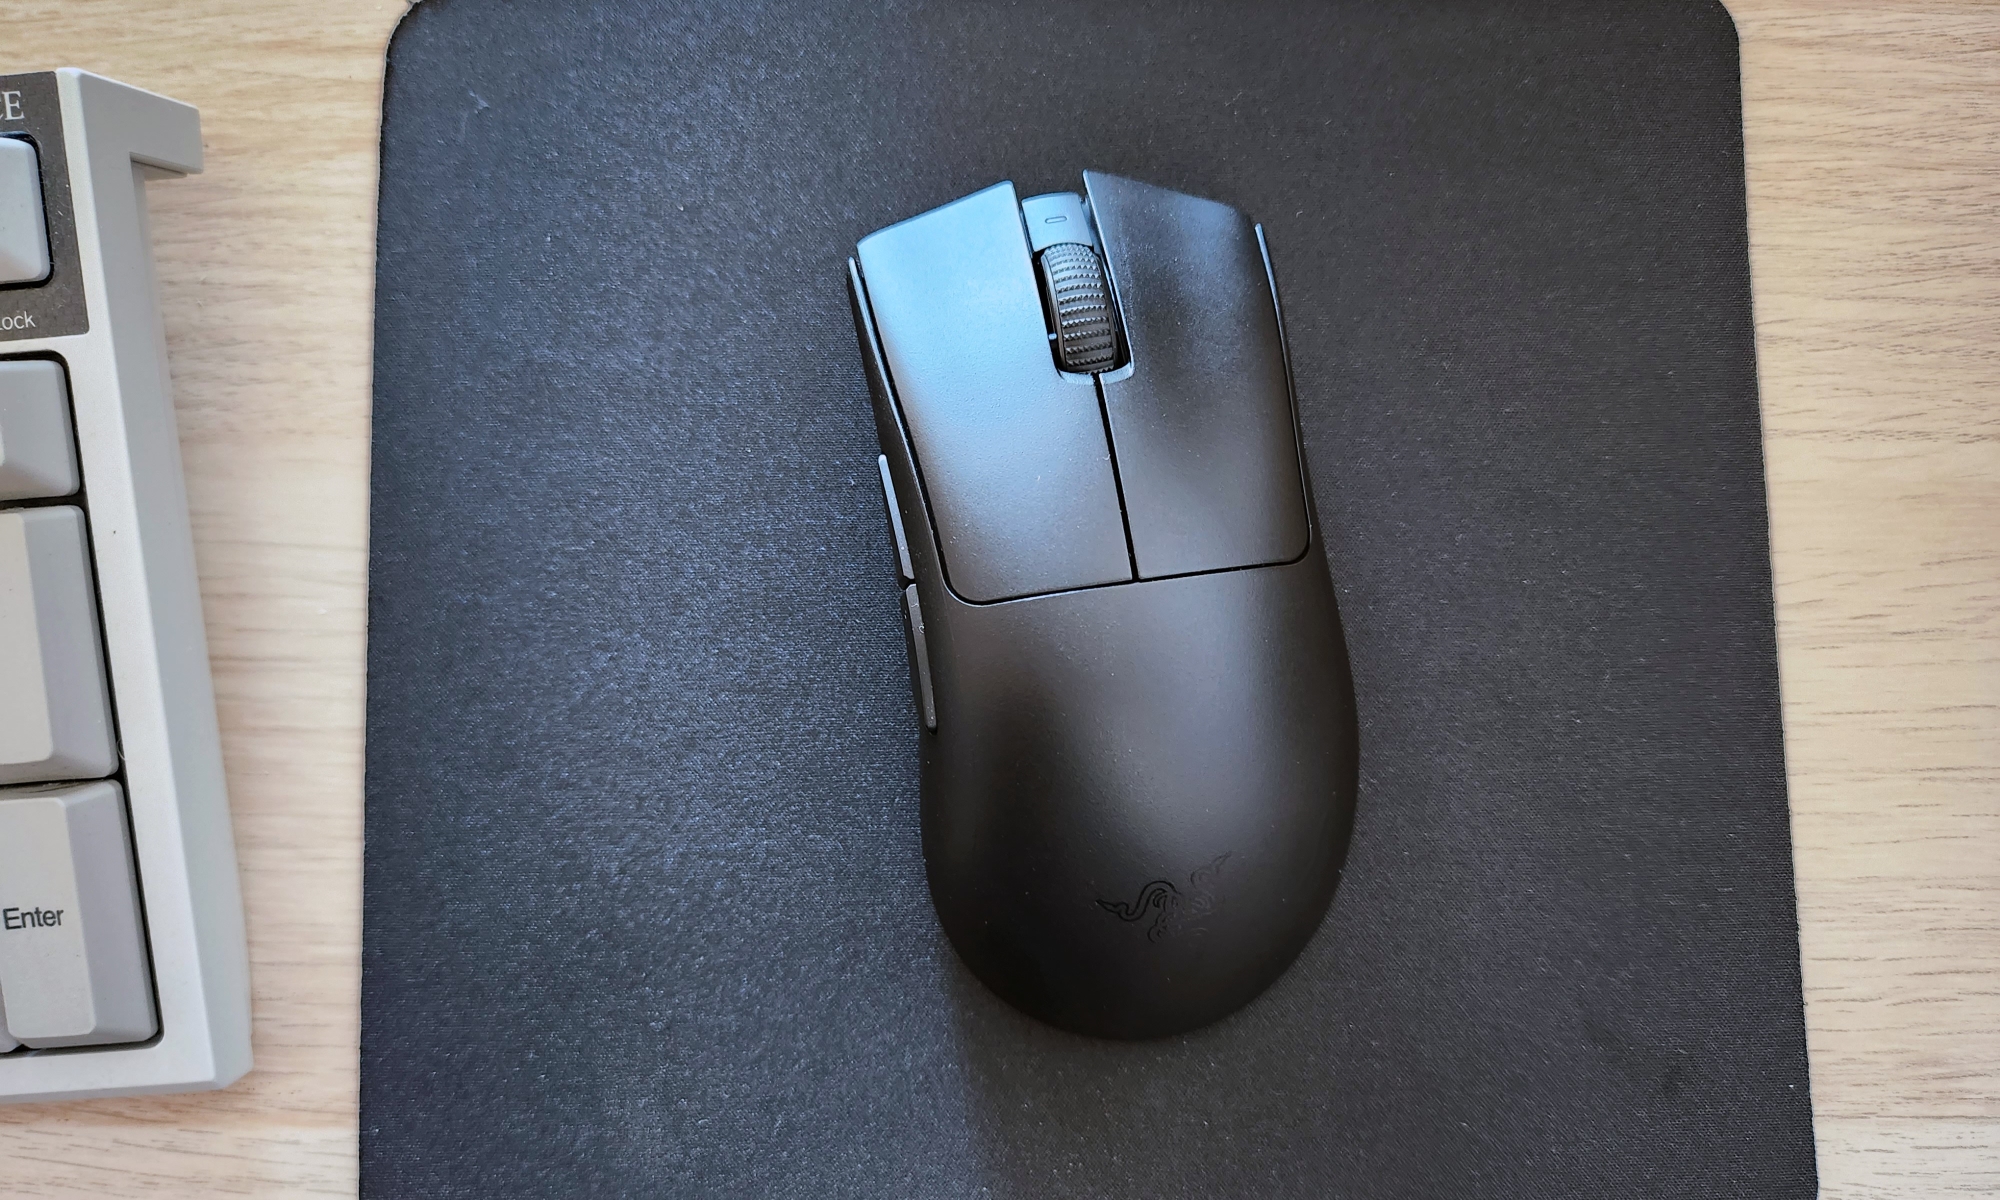 The Razer DeathAdder V3 Pro gaming mouse rested atop a black mouse pad on a desk.